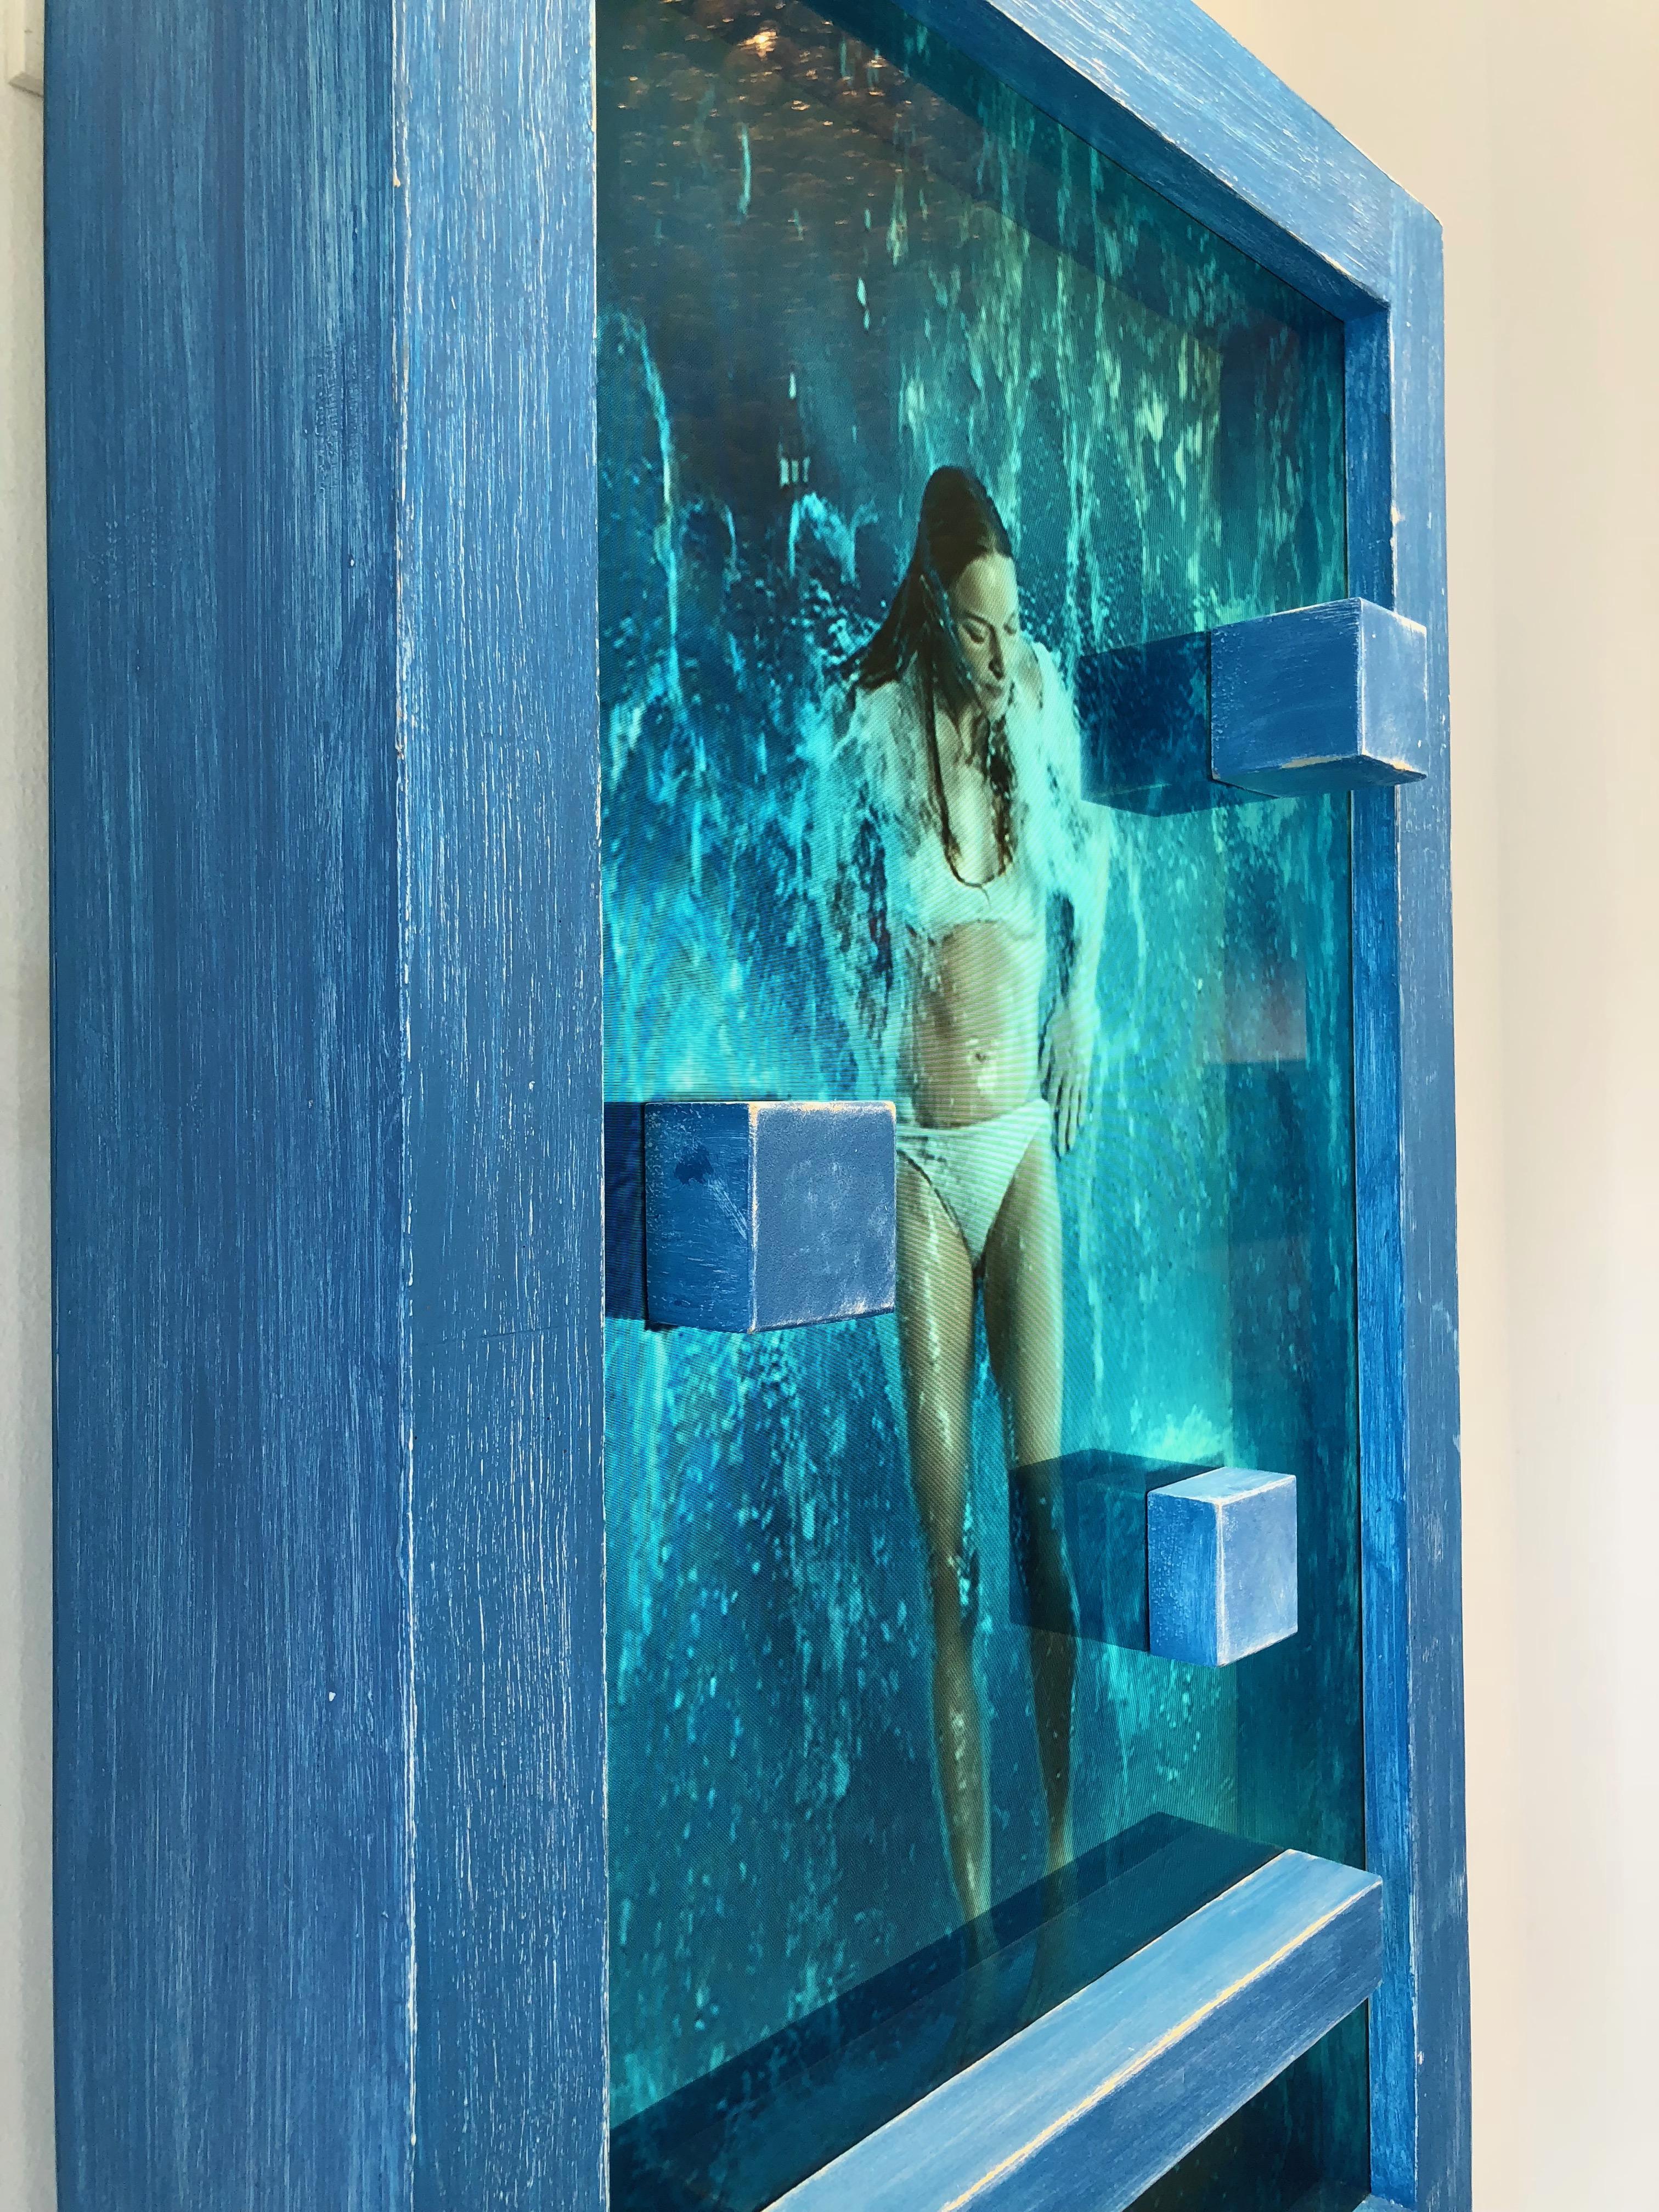 MARCK
 
'Waterfall' features 3 - 20 minute loops each of a different woman (changed by a button at base of the frame) under a continuous waterfall, interacting with blocks and a platform that exist both in the video and on the exterior of the